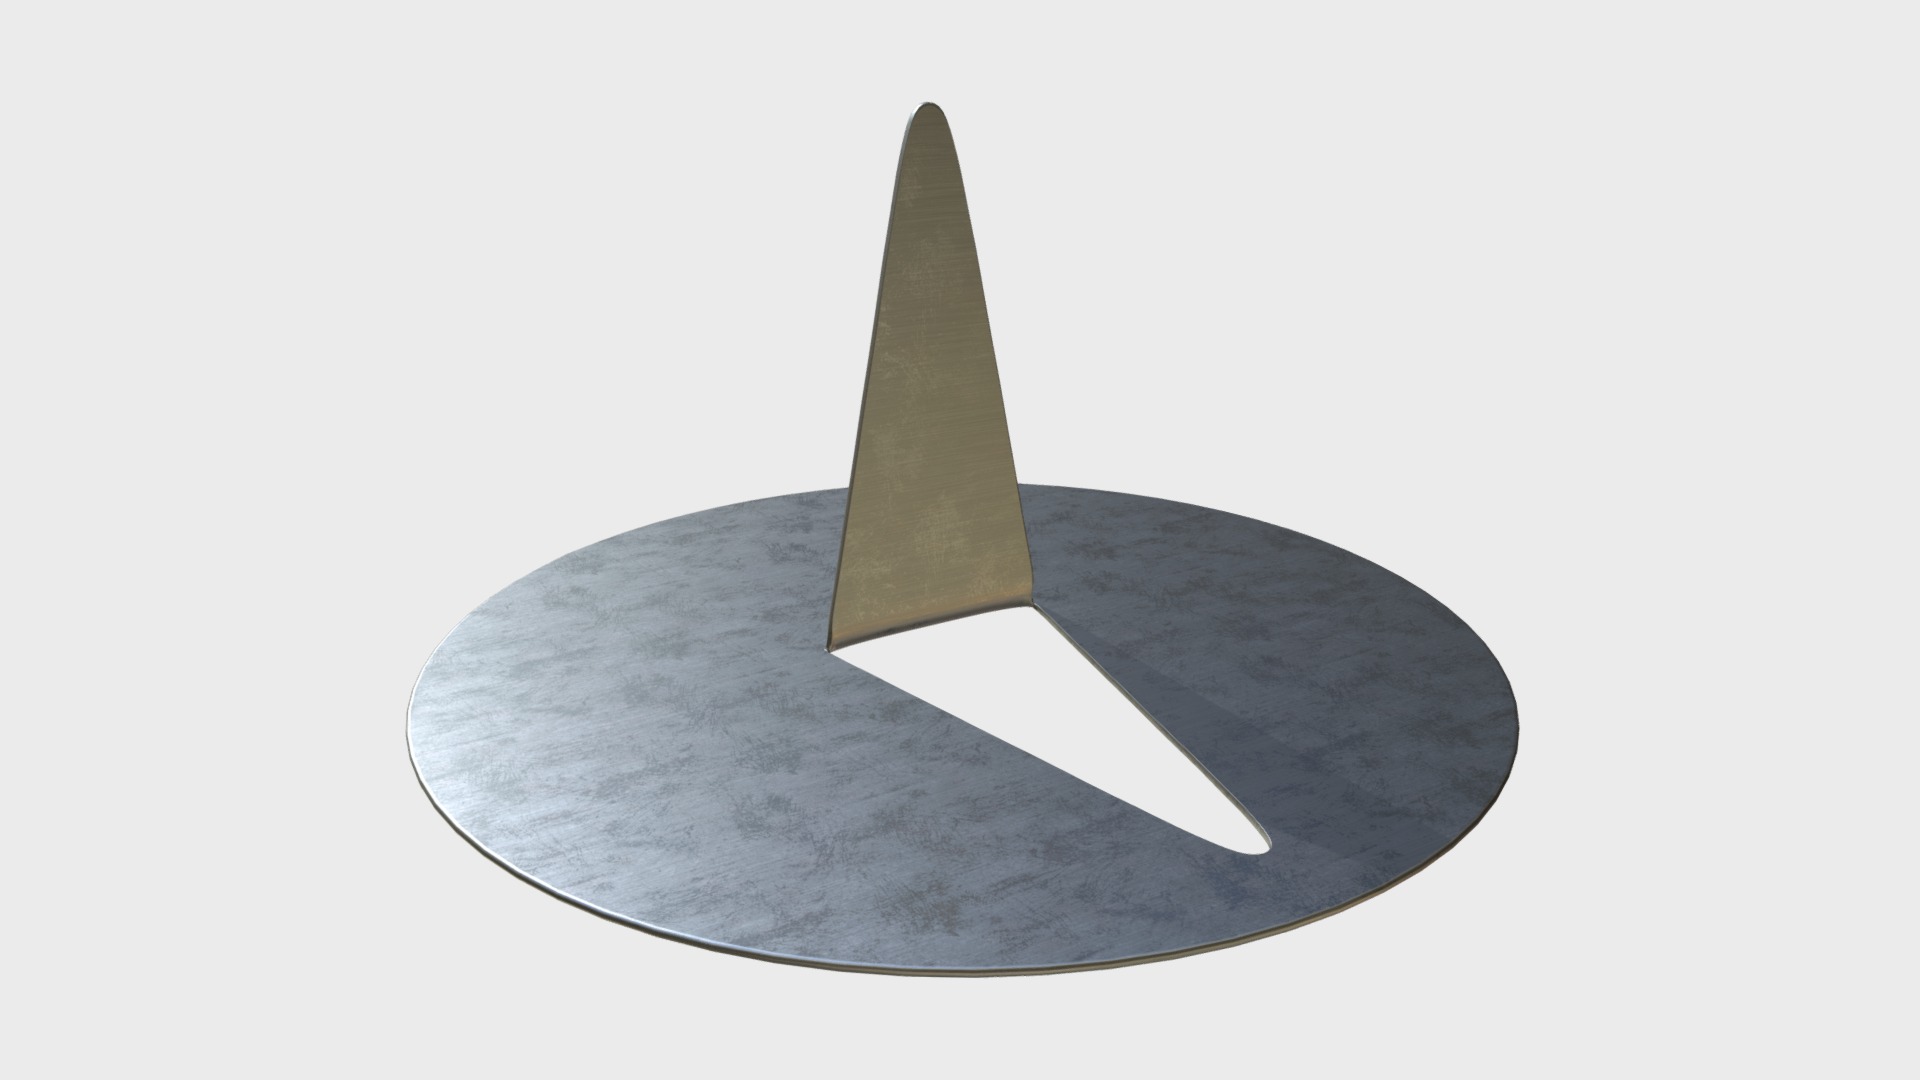 3D model Flat head pushpin - This is a 3D model of the Flat head pushpin. The 3D model is about a grey and black pyramid.